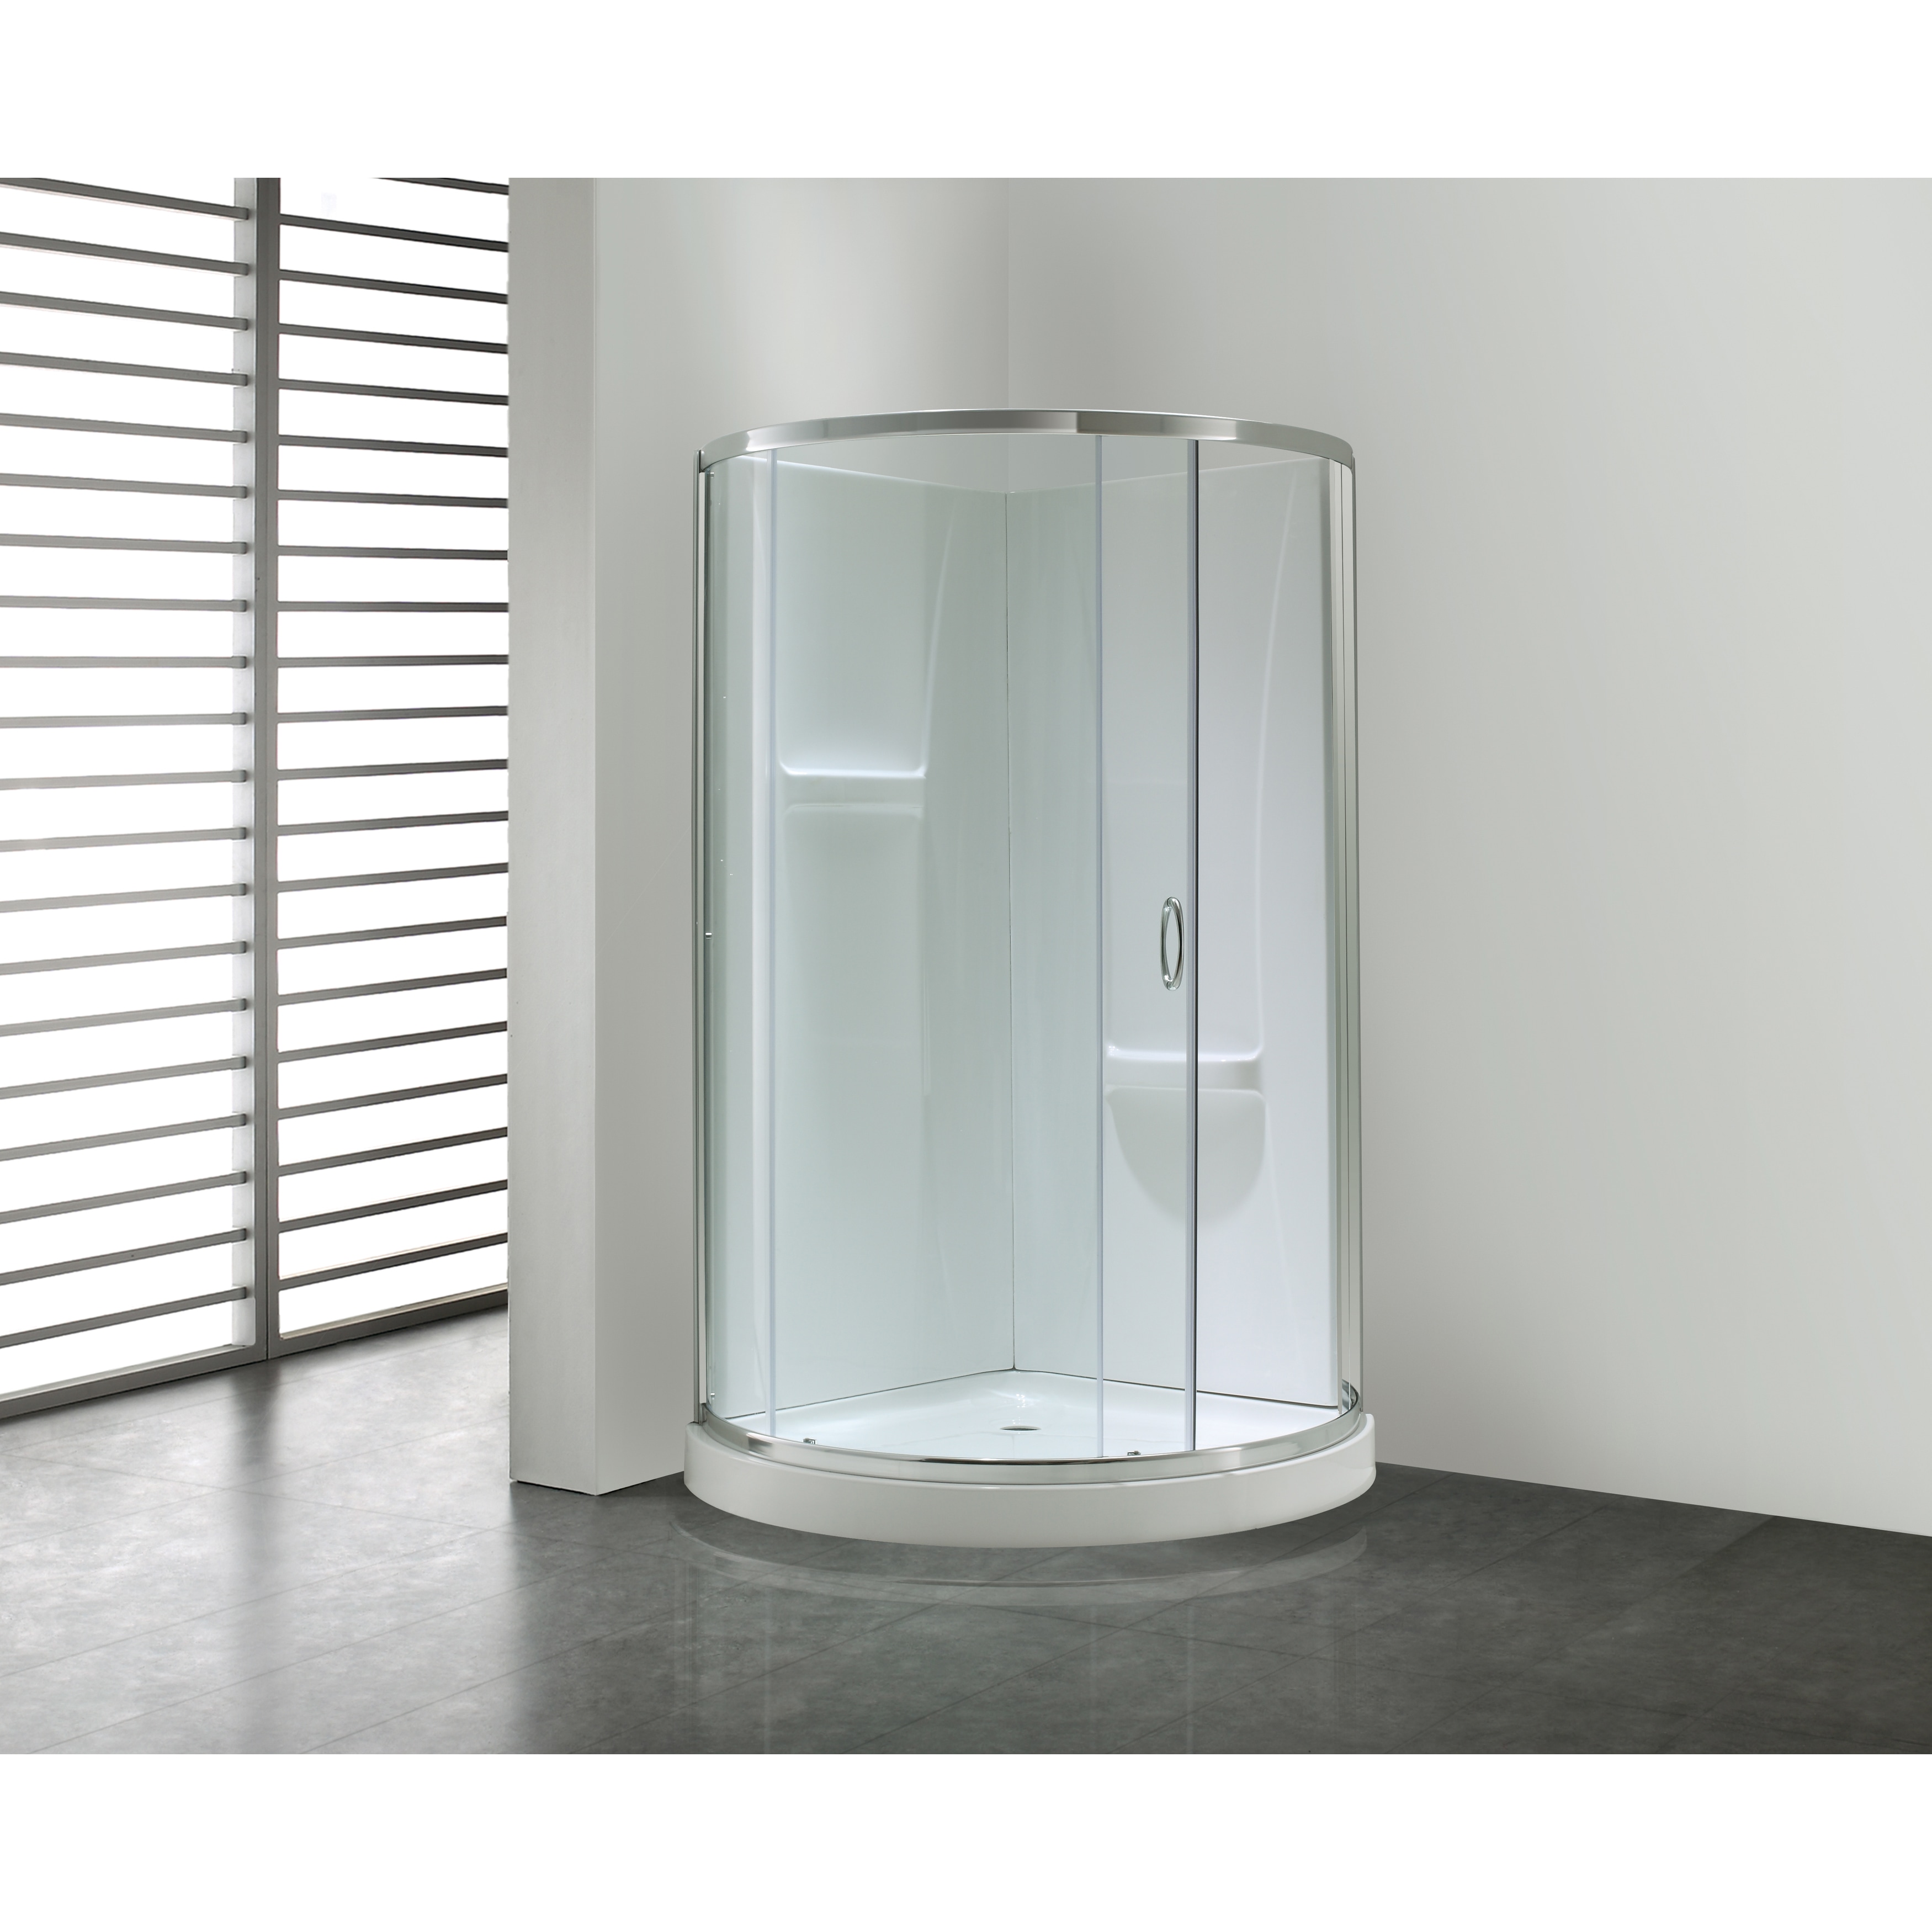 Shop Ove Decors Breeze 34 Inch Round Corner Shower Enclosure Free Shipping Today Overstock